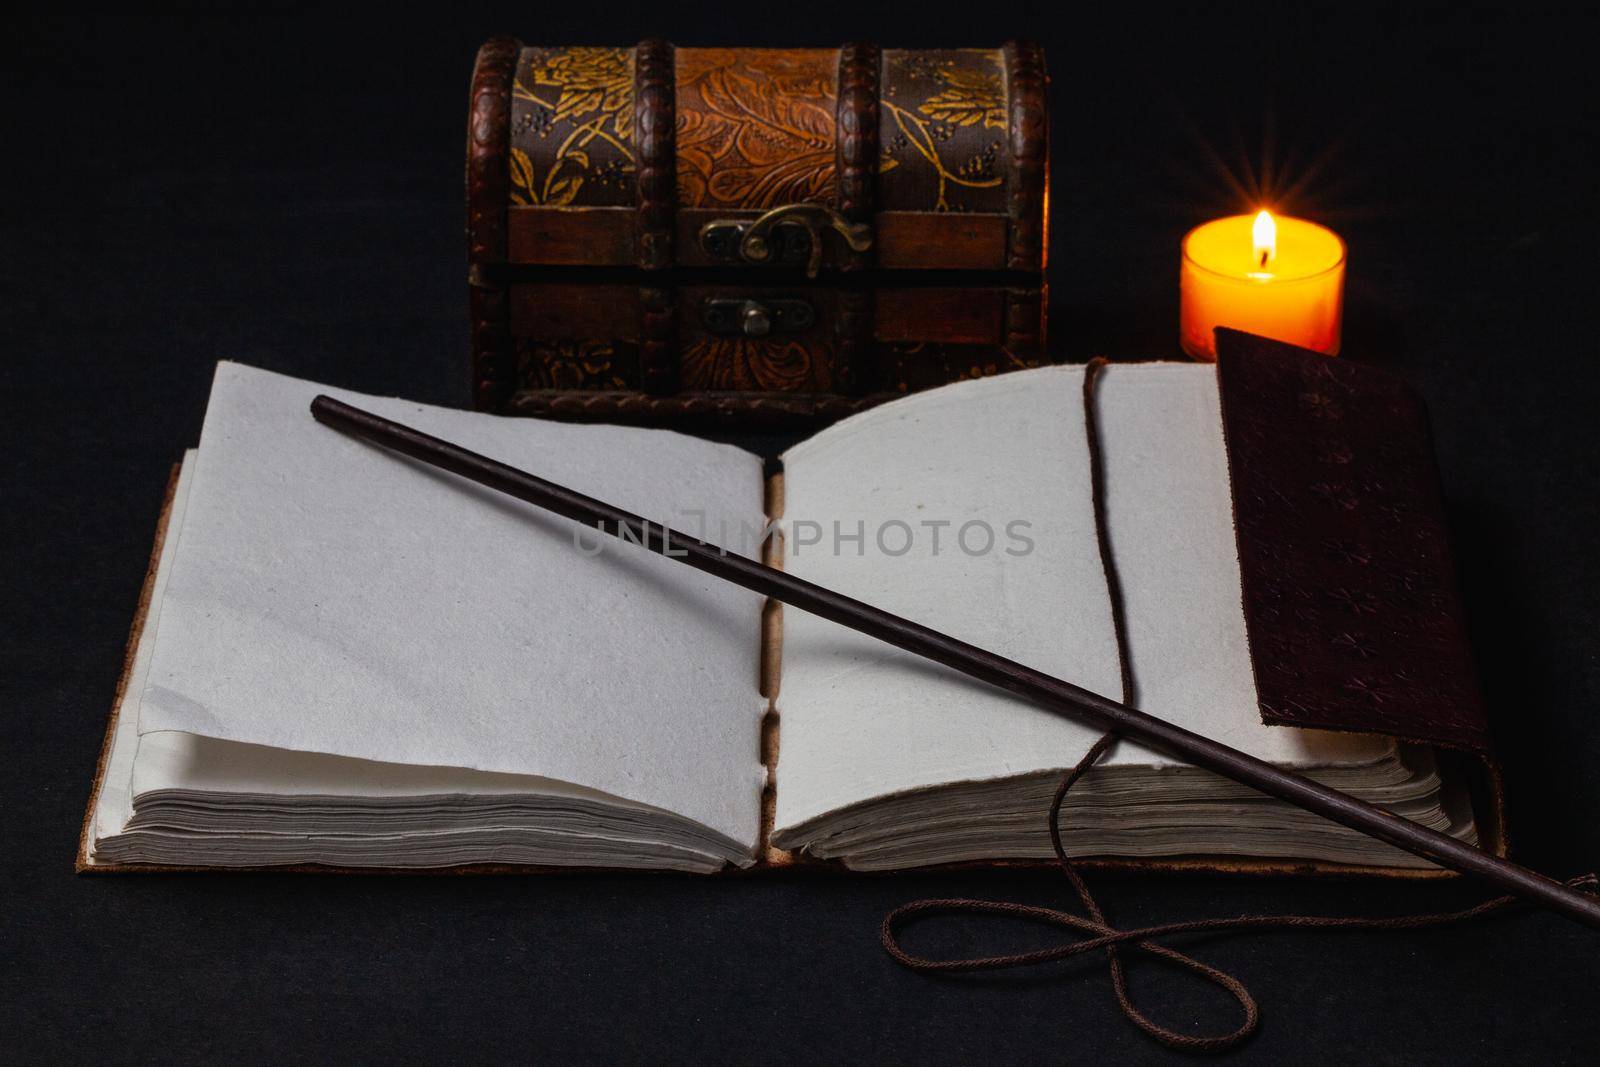 Image of open magic book and wand on the table in the dark room.